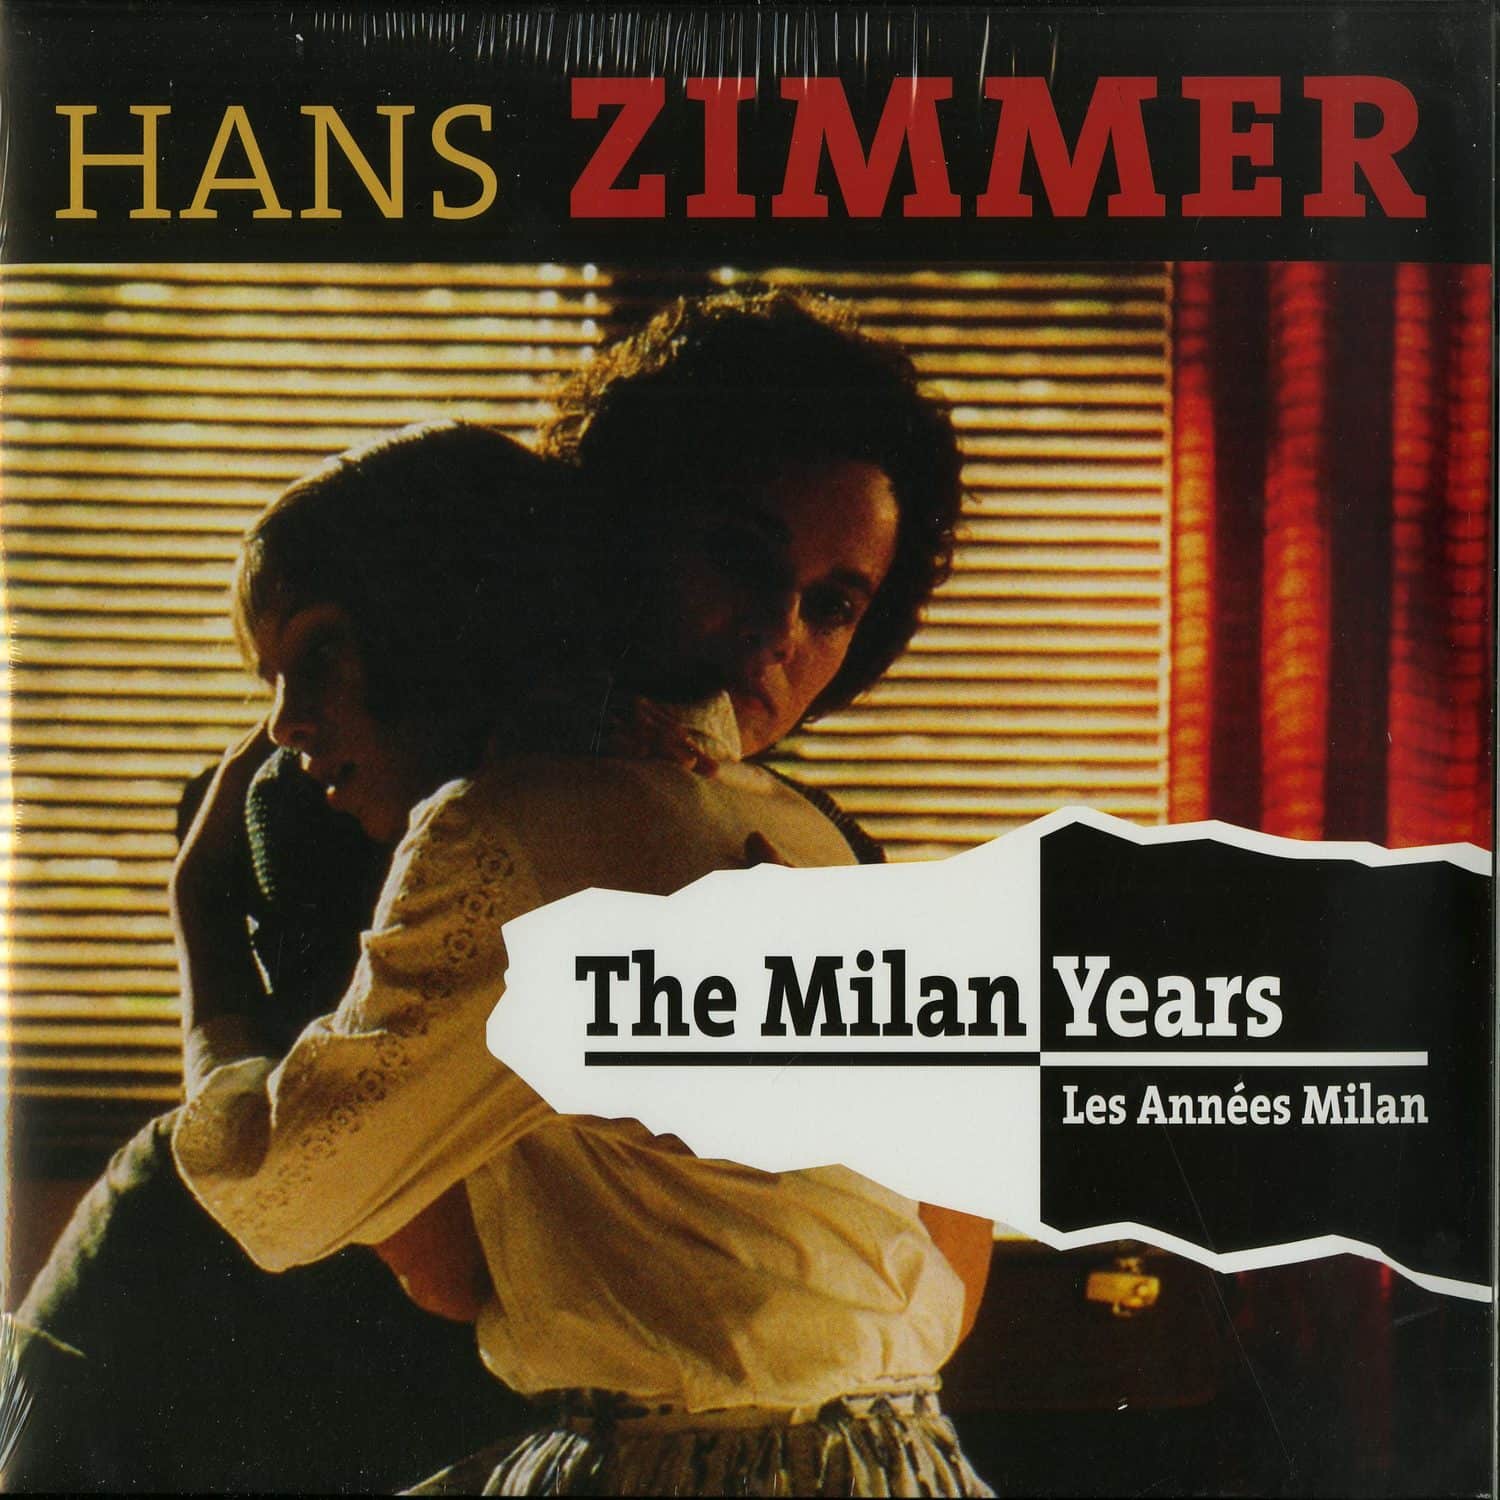 Hans Zimmer - THE MILAN YEARS 